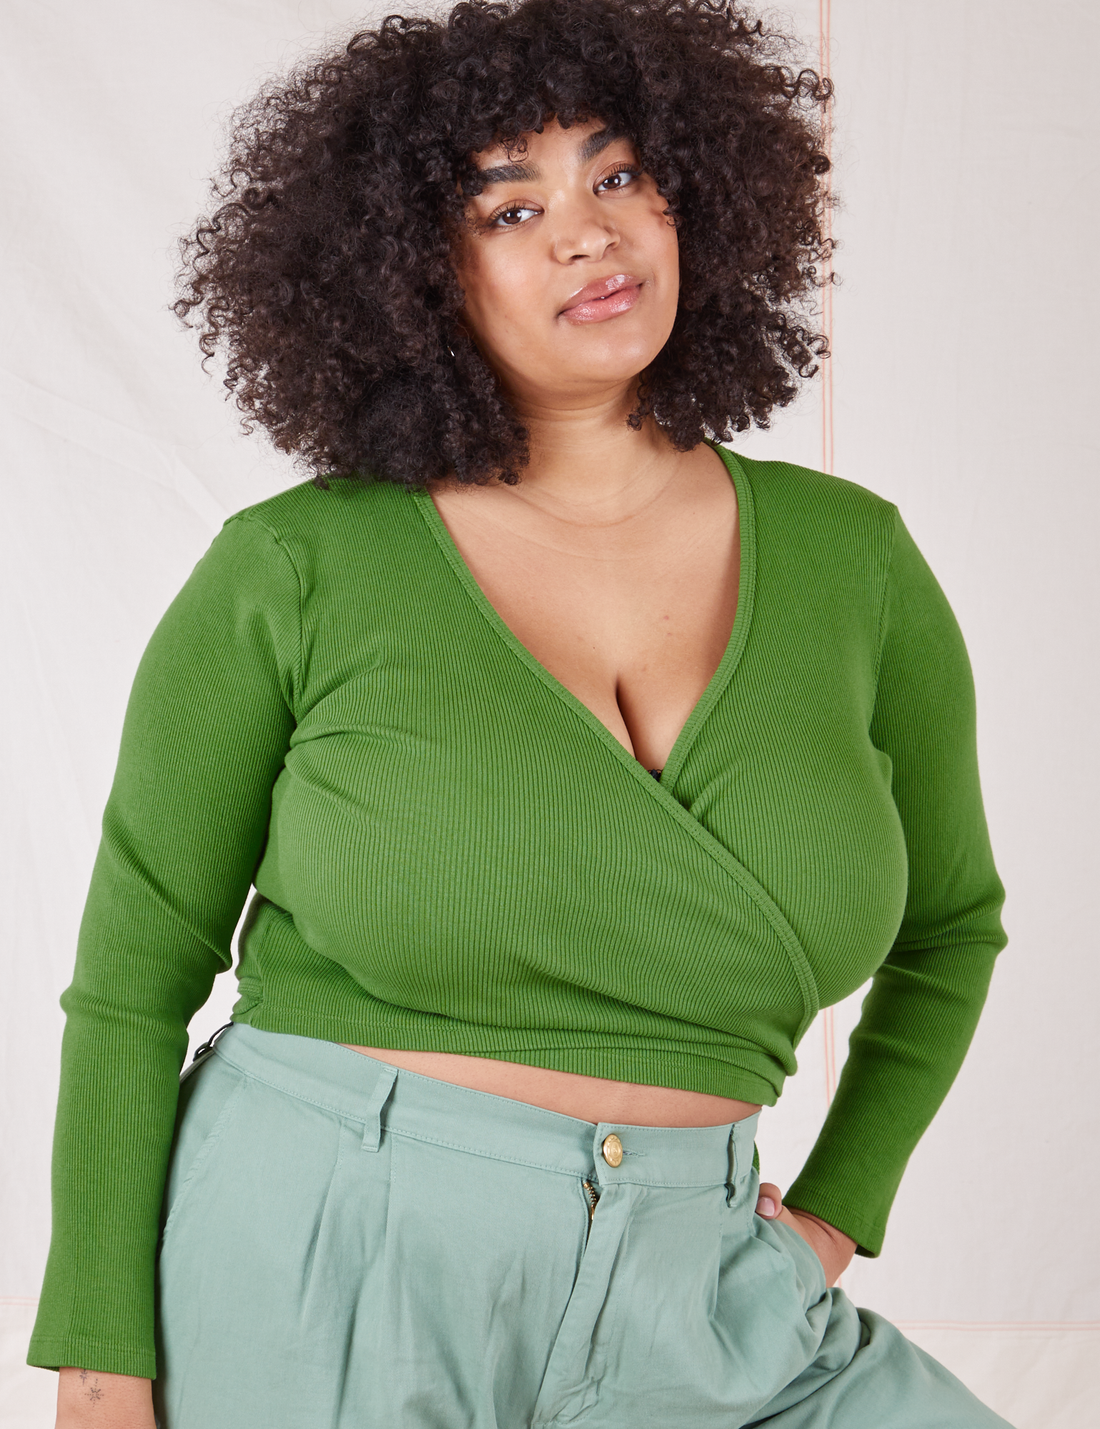 Wrap Top in Bright Olive on Lana